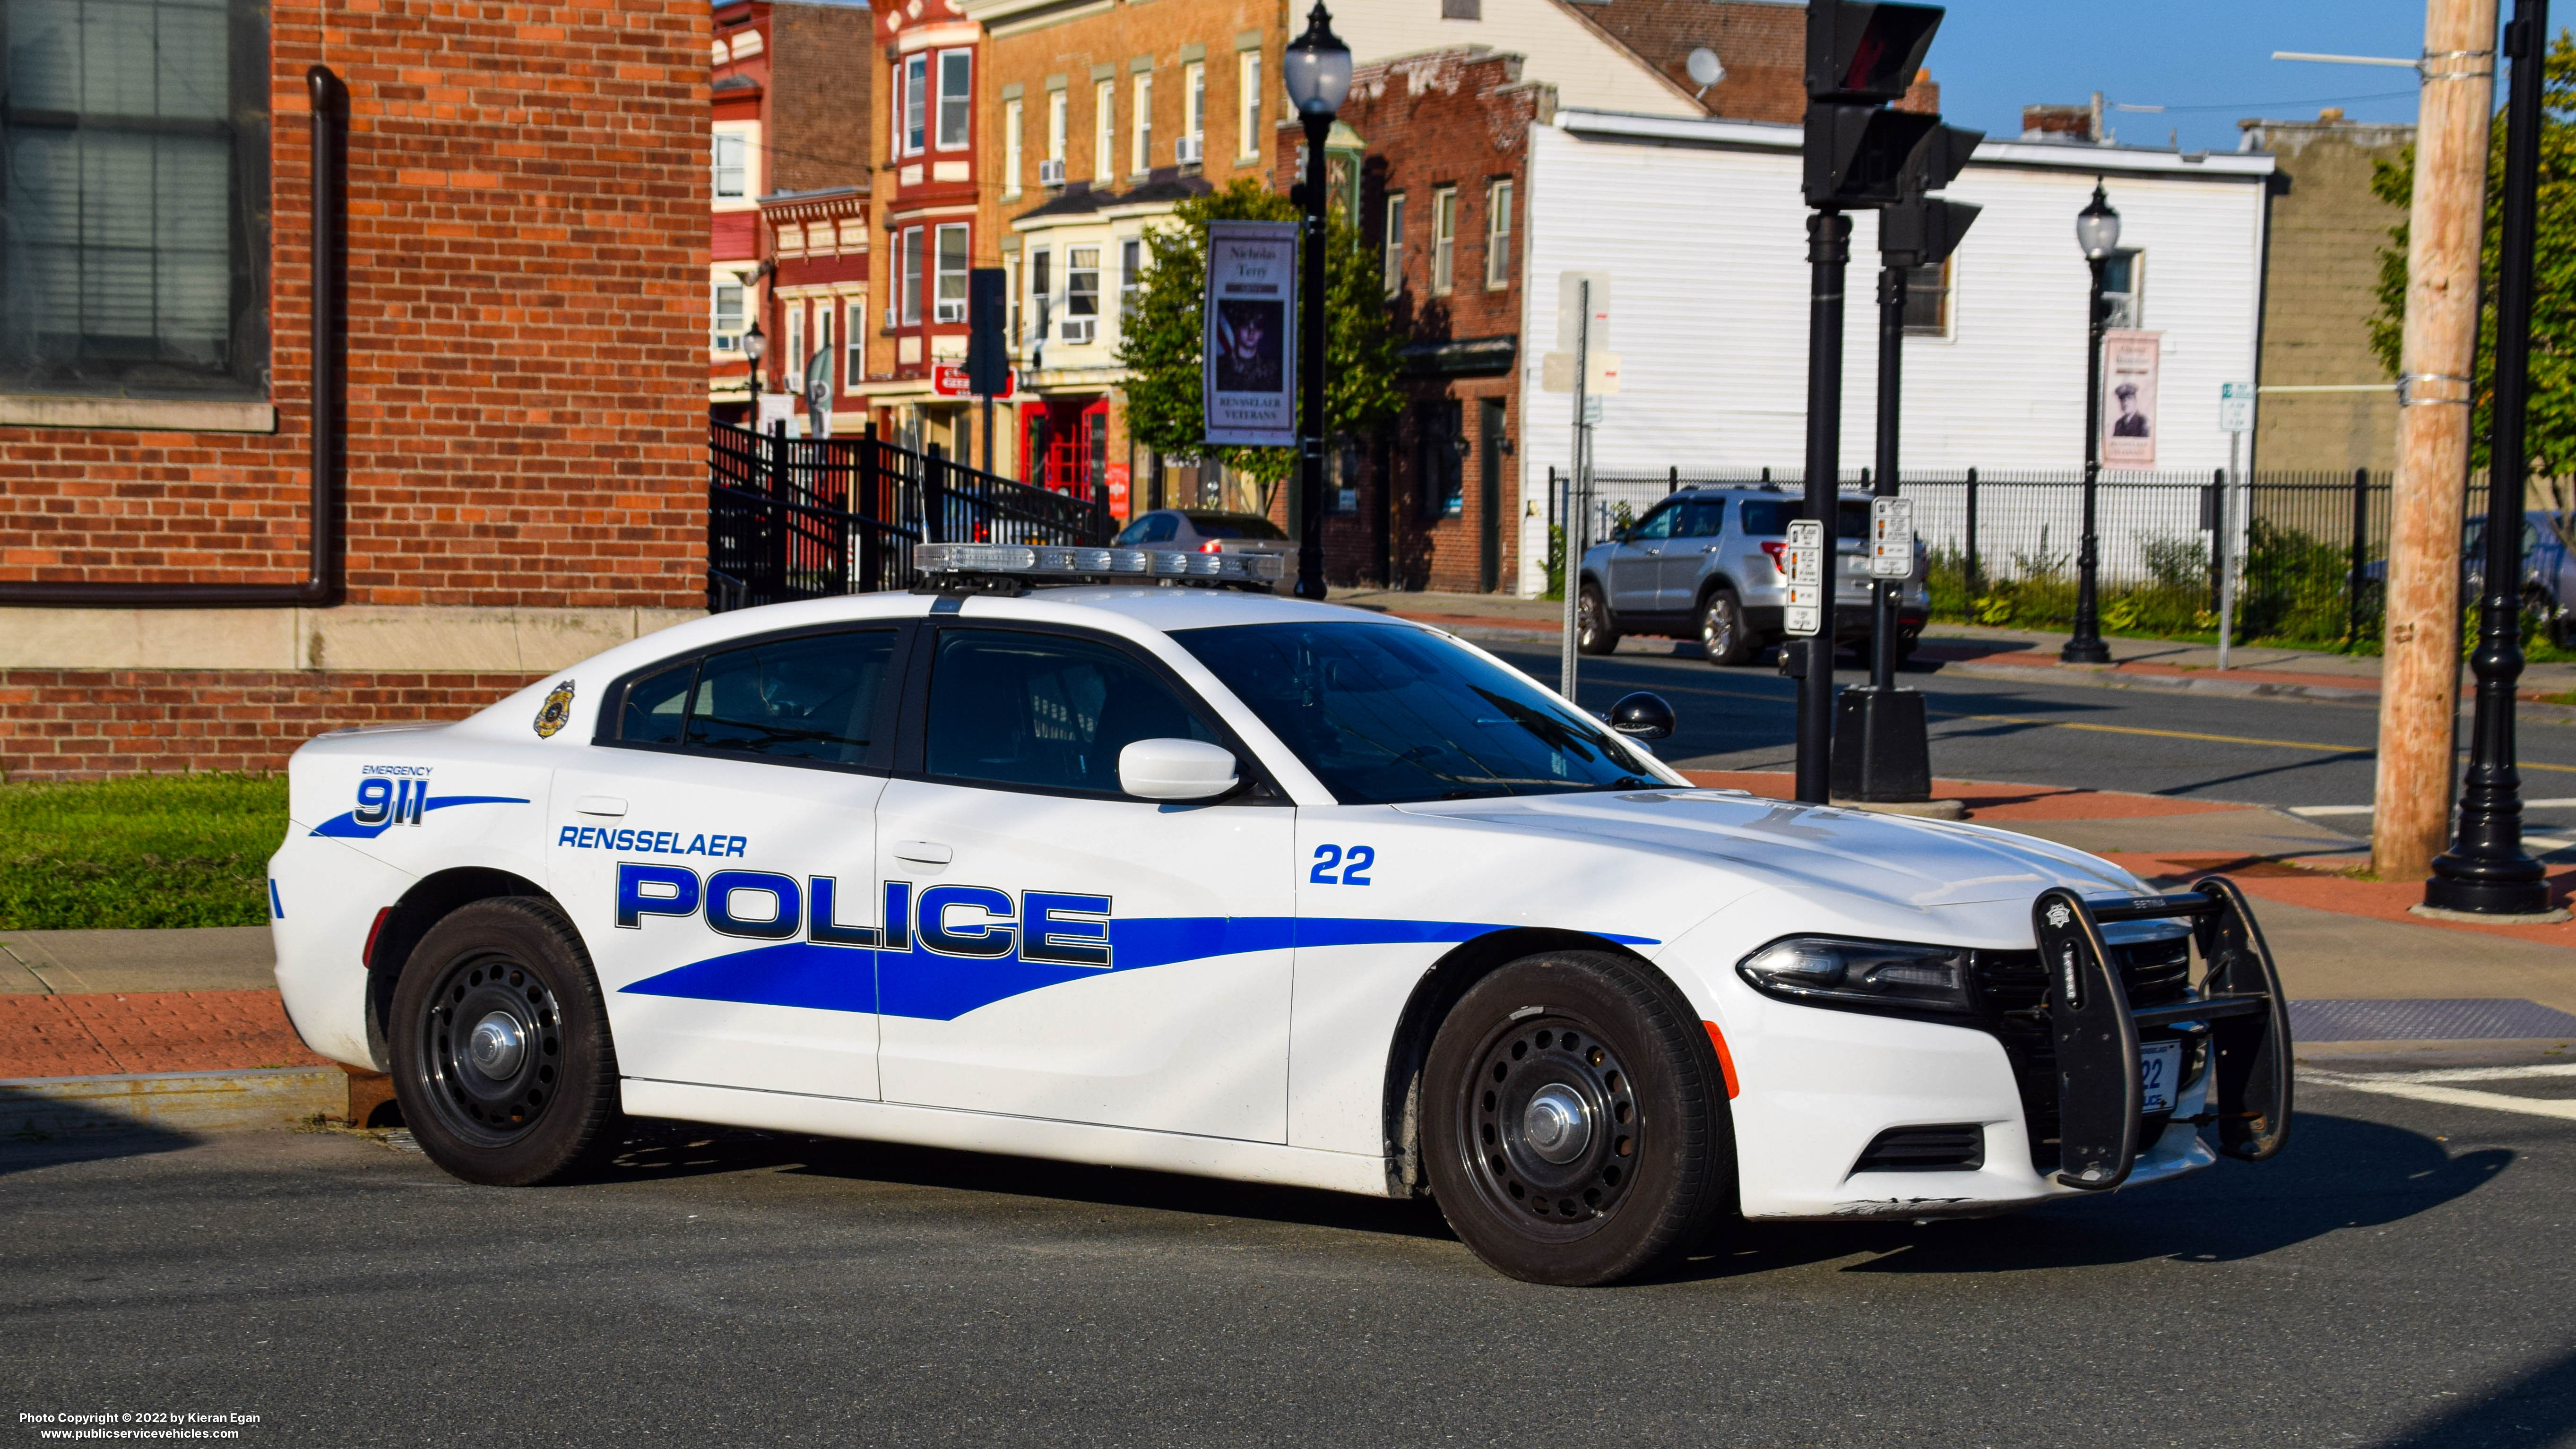 A photo  of Rensselaer Police
            Cruiser 22, a 2015-2020 Dodge Charger             taken by Kieran Egan